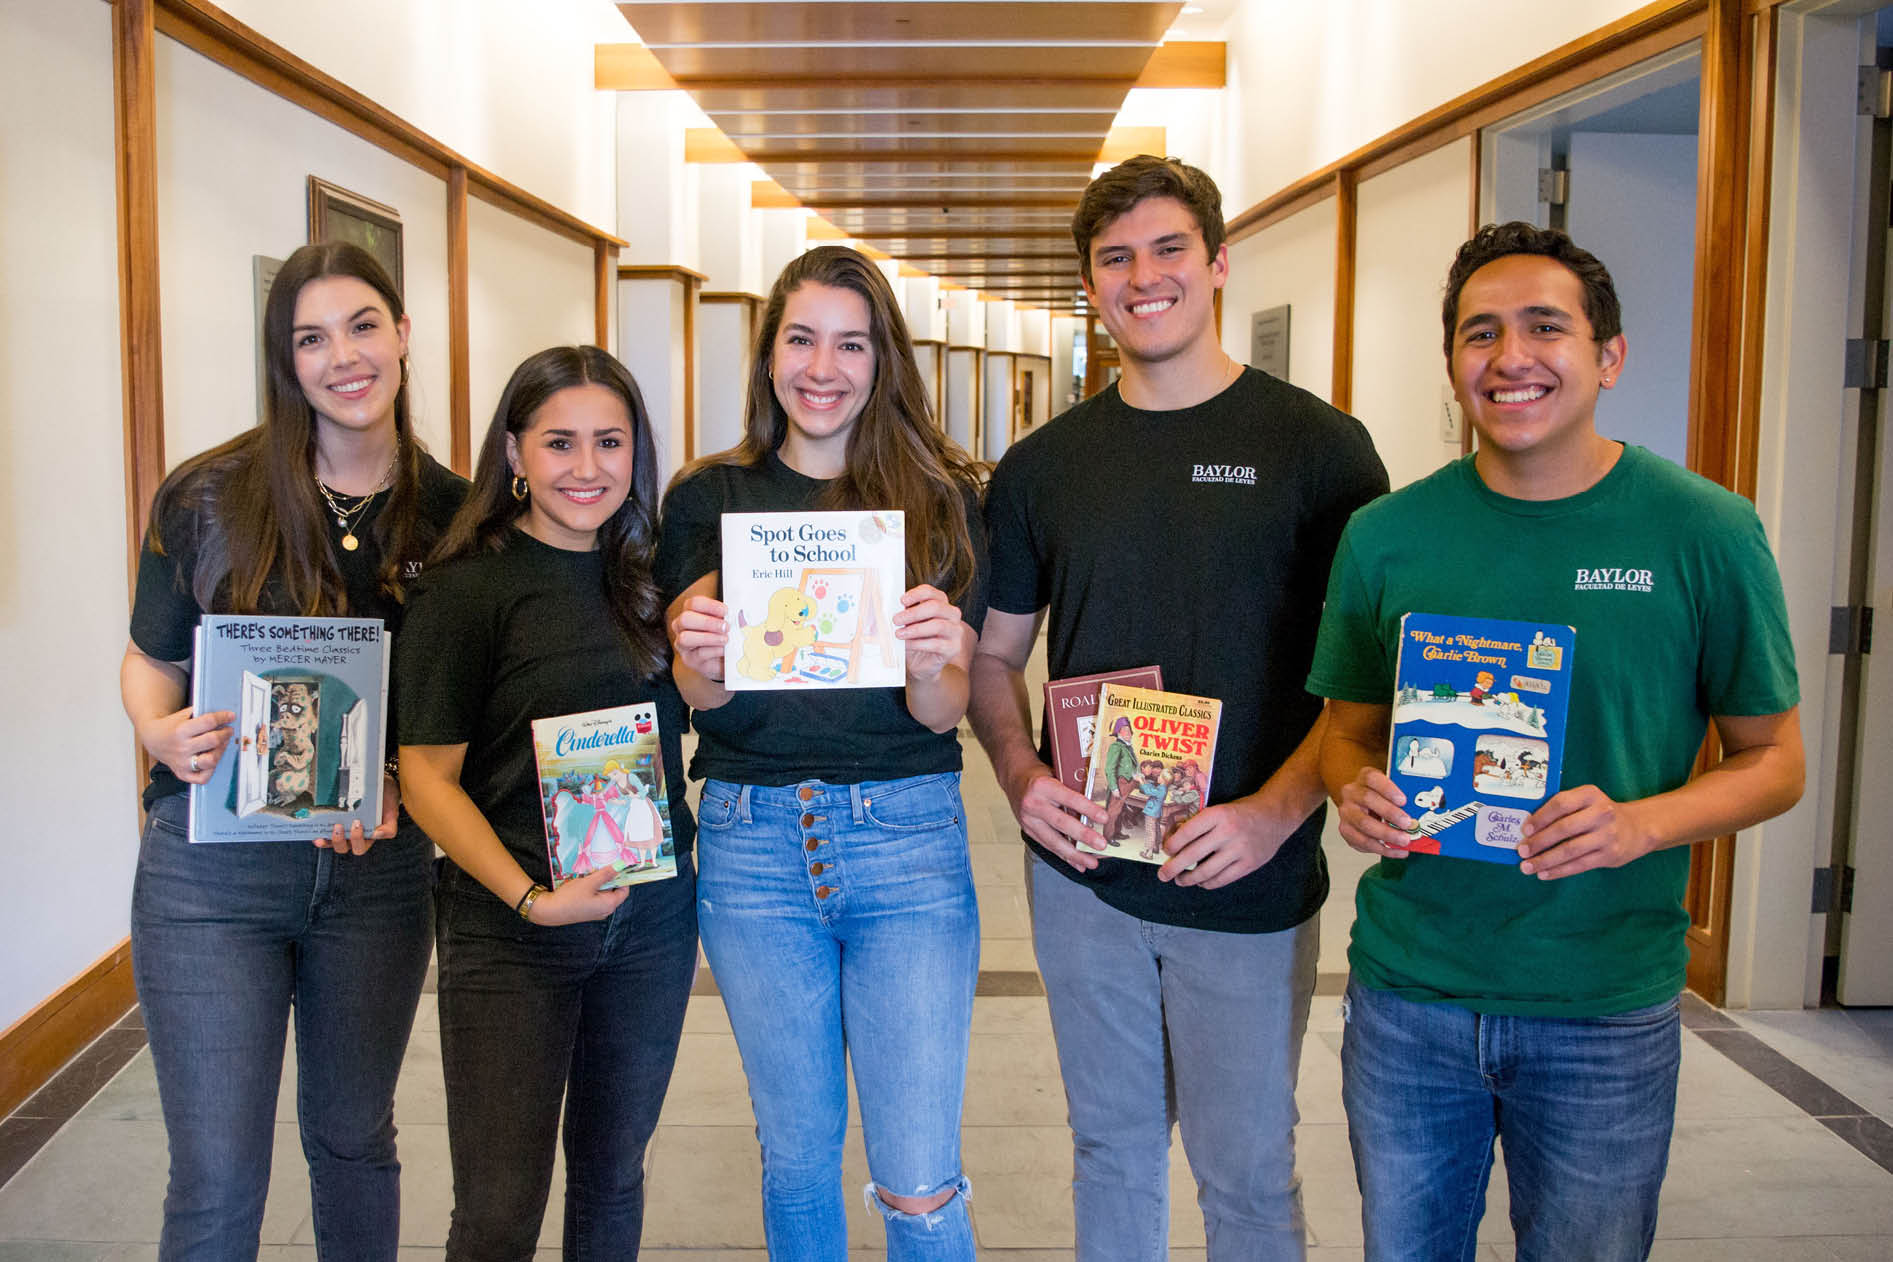 Five law school students holding childrens books that were donated during the Hispanic Law Student Association Book Drive in early 2022